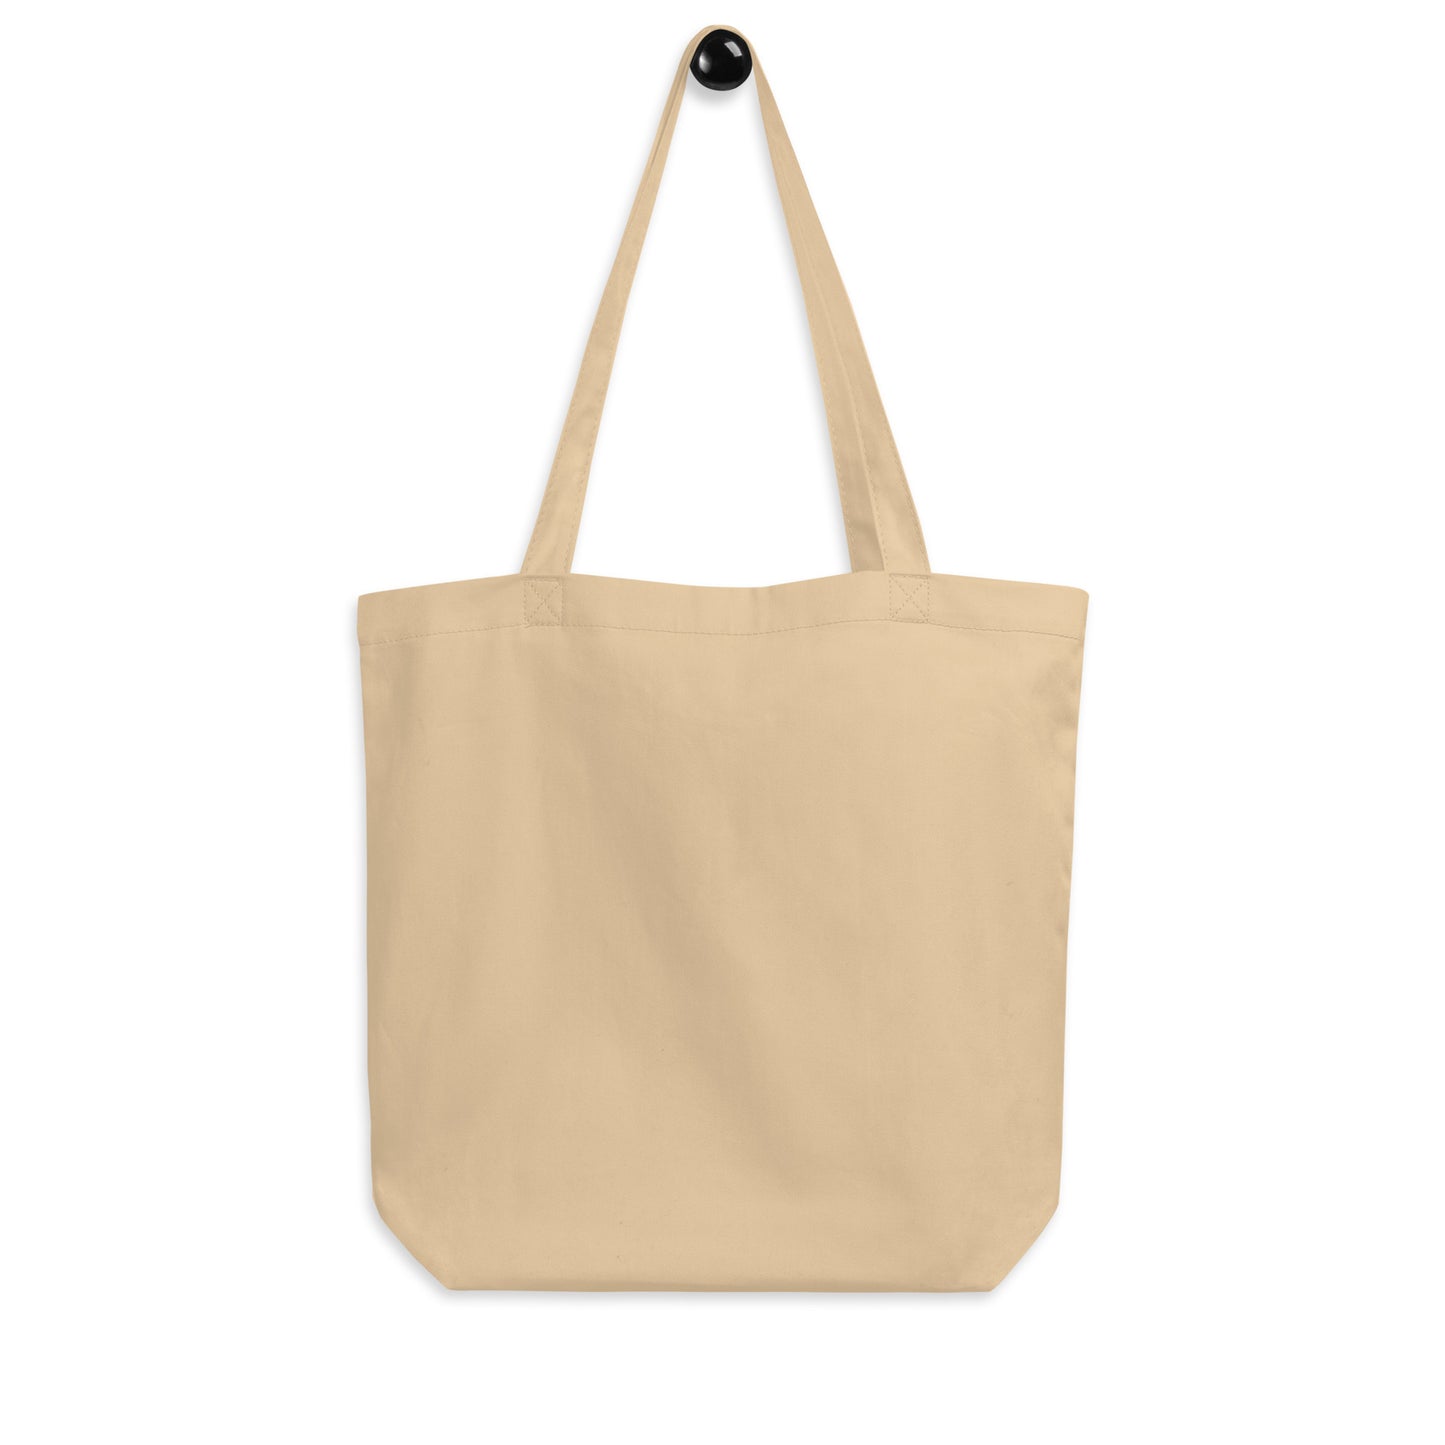 Aviation Gift Organic Tote - Black • IST Istanbul • YHM Designs - Image 05